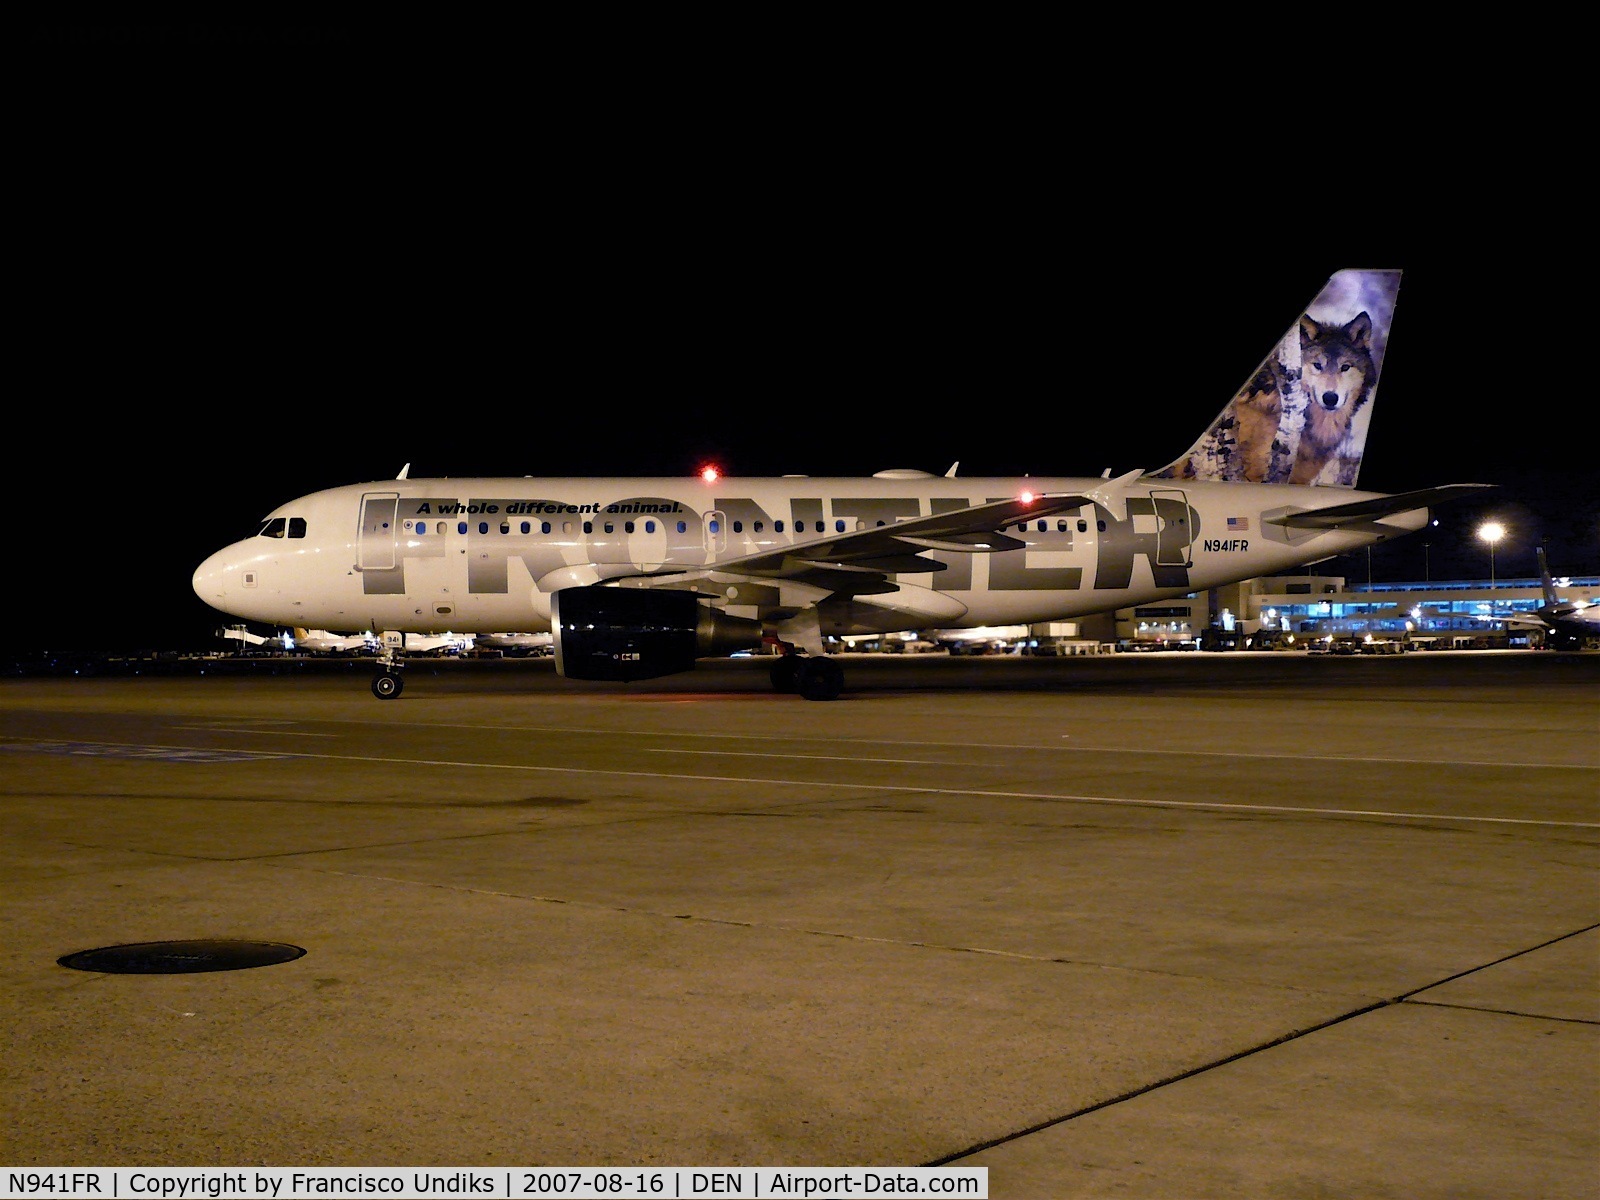 N941FR, 2005 Airbus A319-112 C/N 2483, Frontier Airlines A319